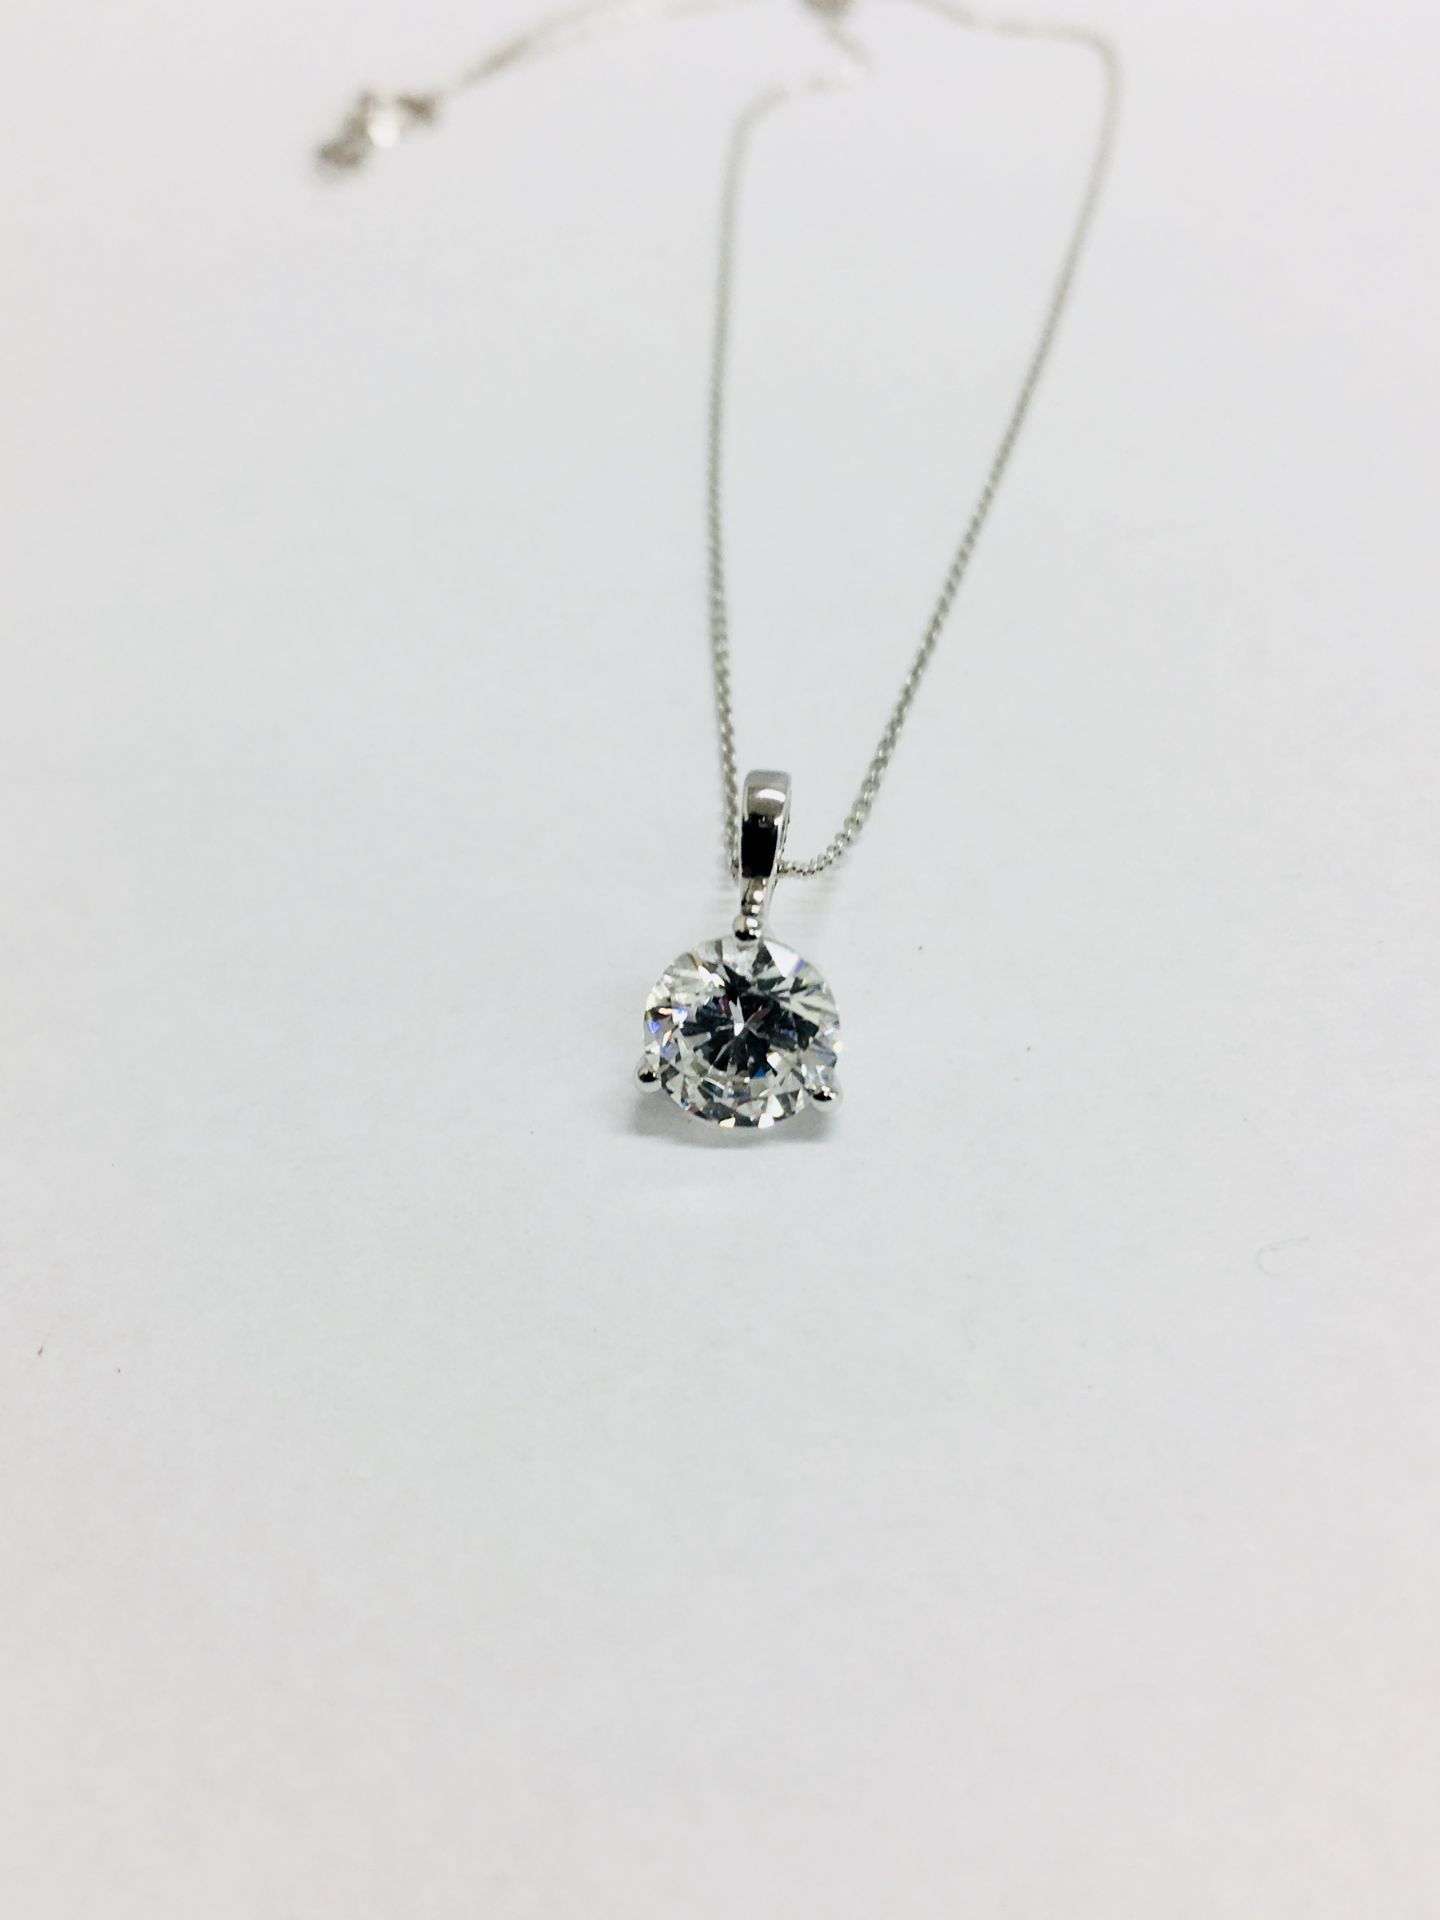 1.00Ct Diamond Solitaire Pendant Set In A Platinum 3 Claw Setting. - Image 9 of 12